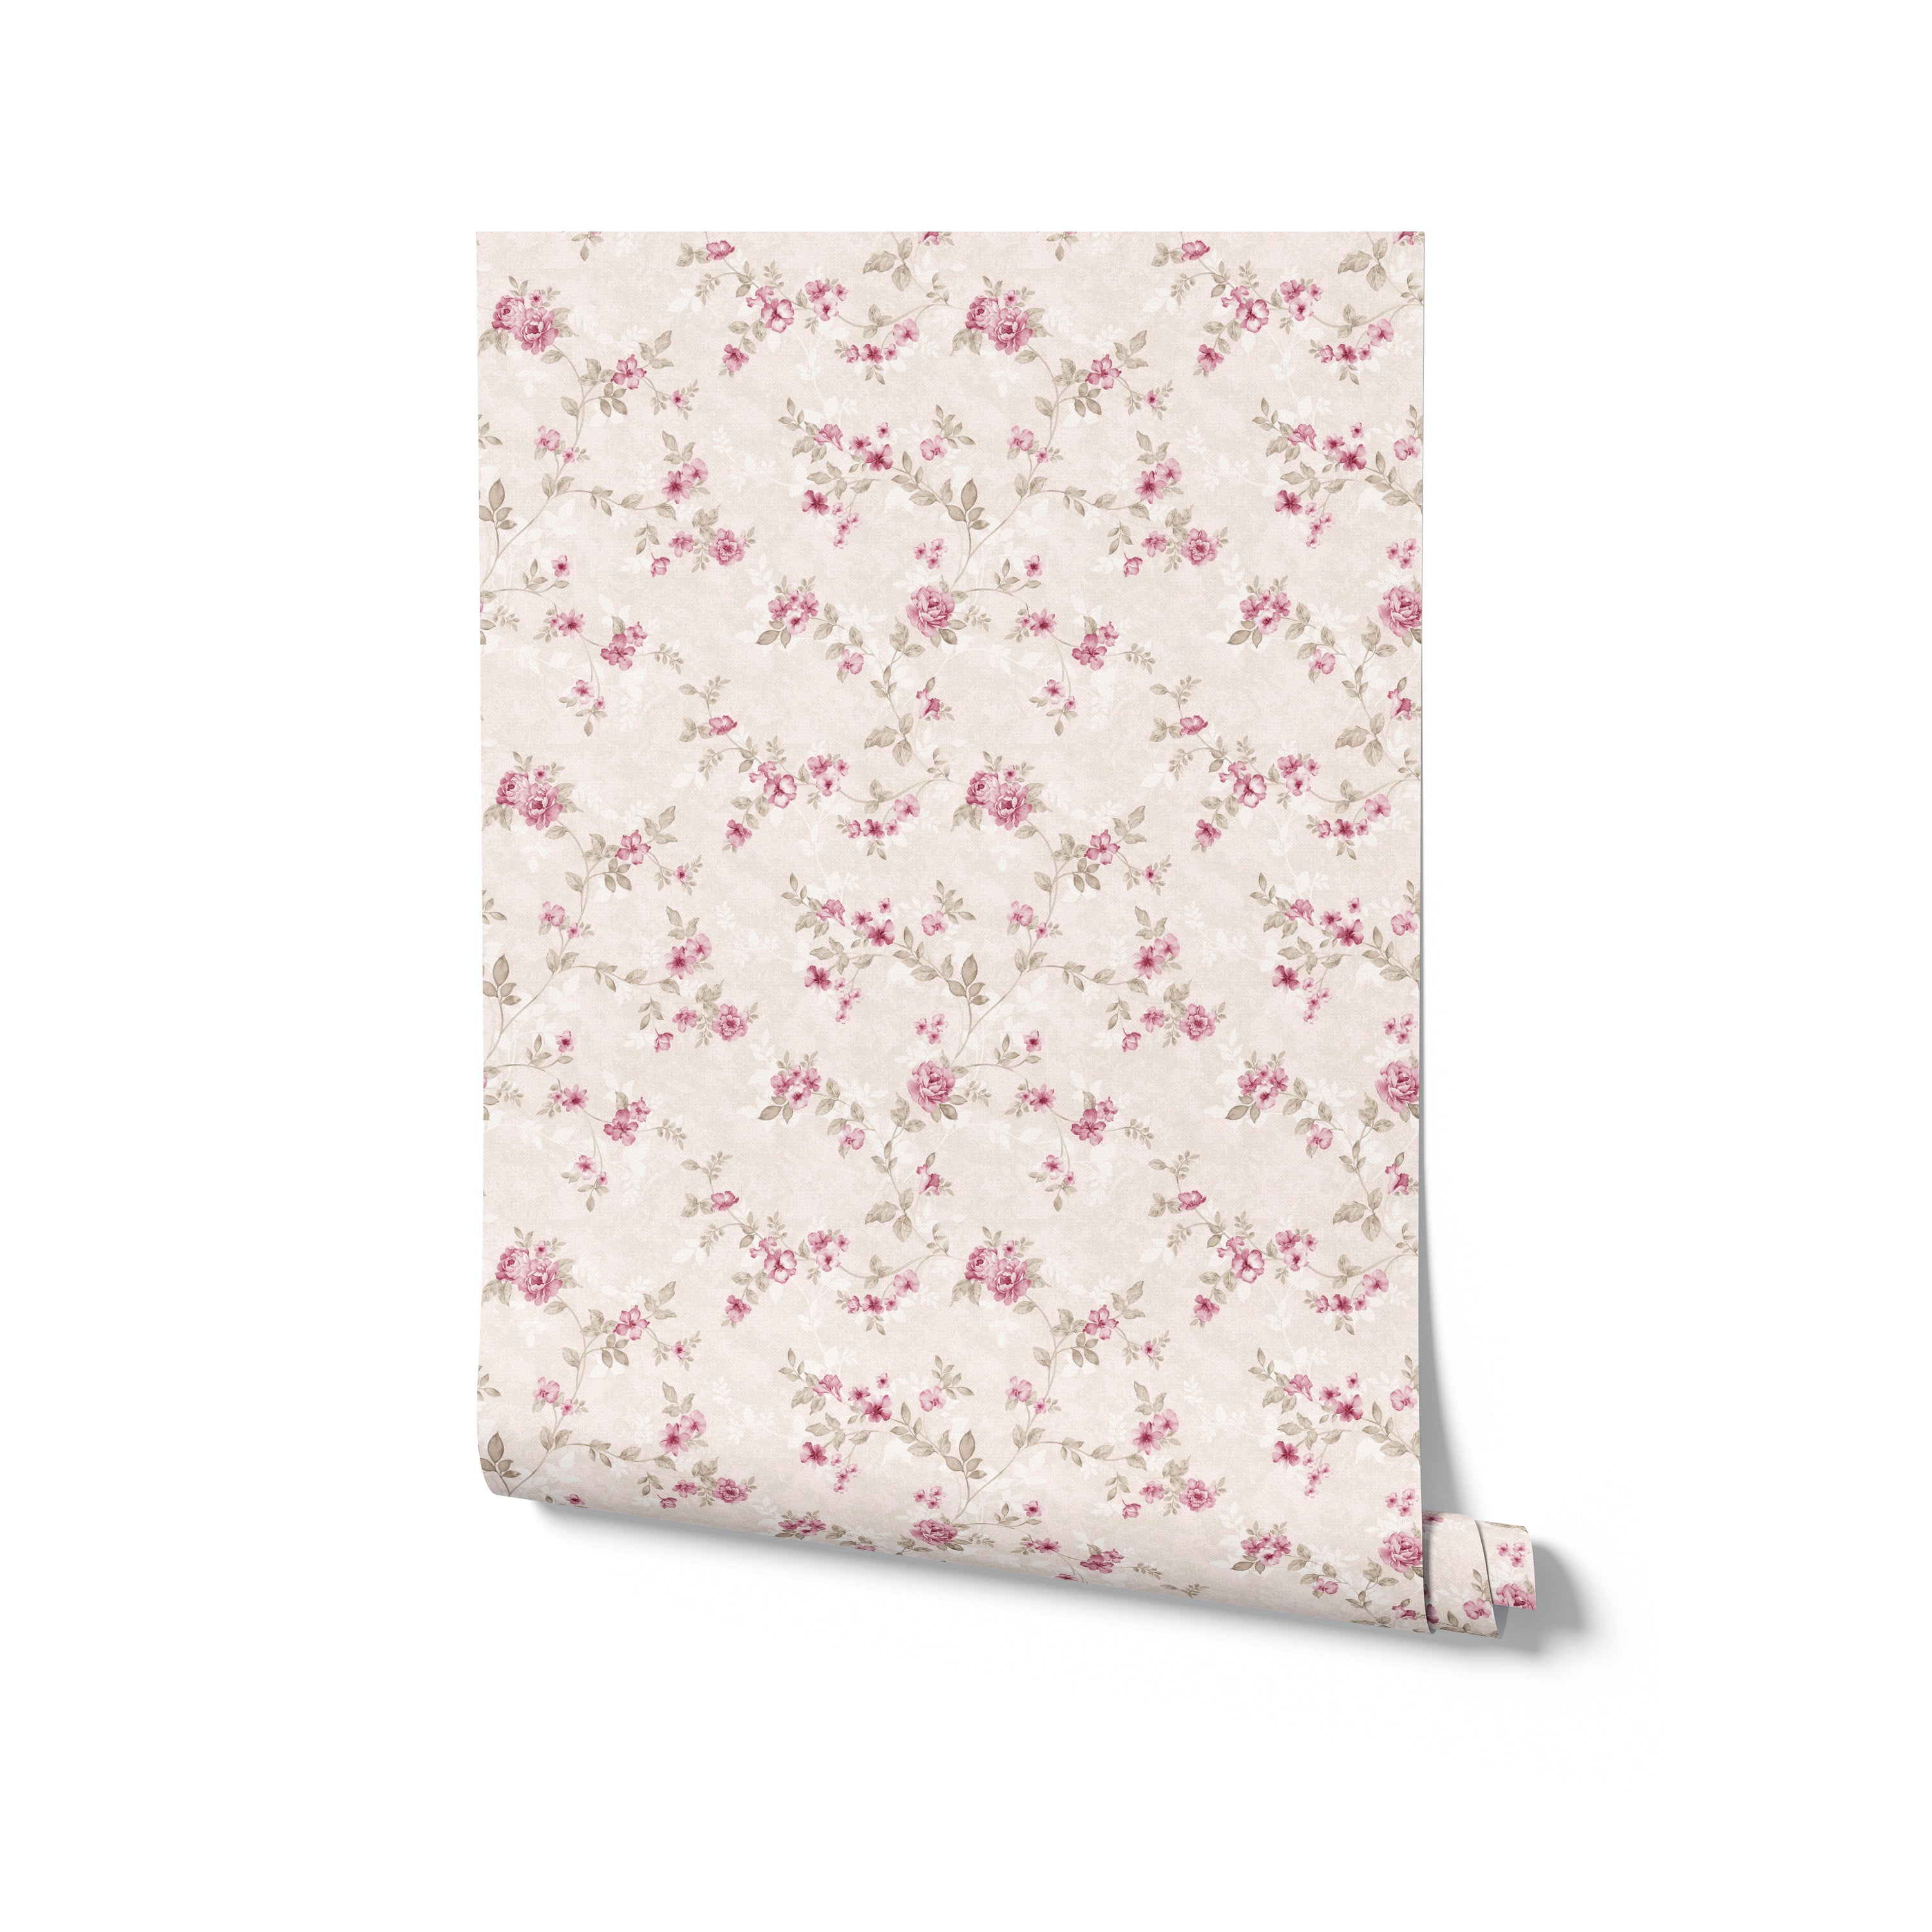 A rolled-up sample of the Catrice Floral Wallpaper displaying its pattern of tiny pink roses and greenery scattered across a beige background. This image showcases the wallpaper's potential for adding a touch of understated elegance to home decor.